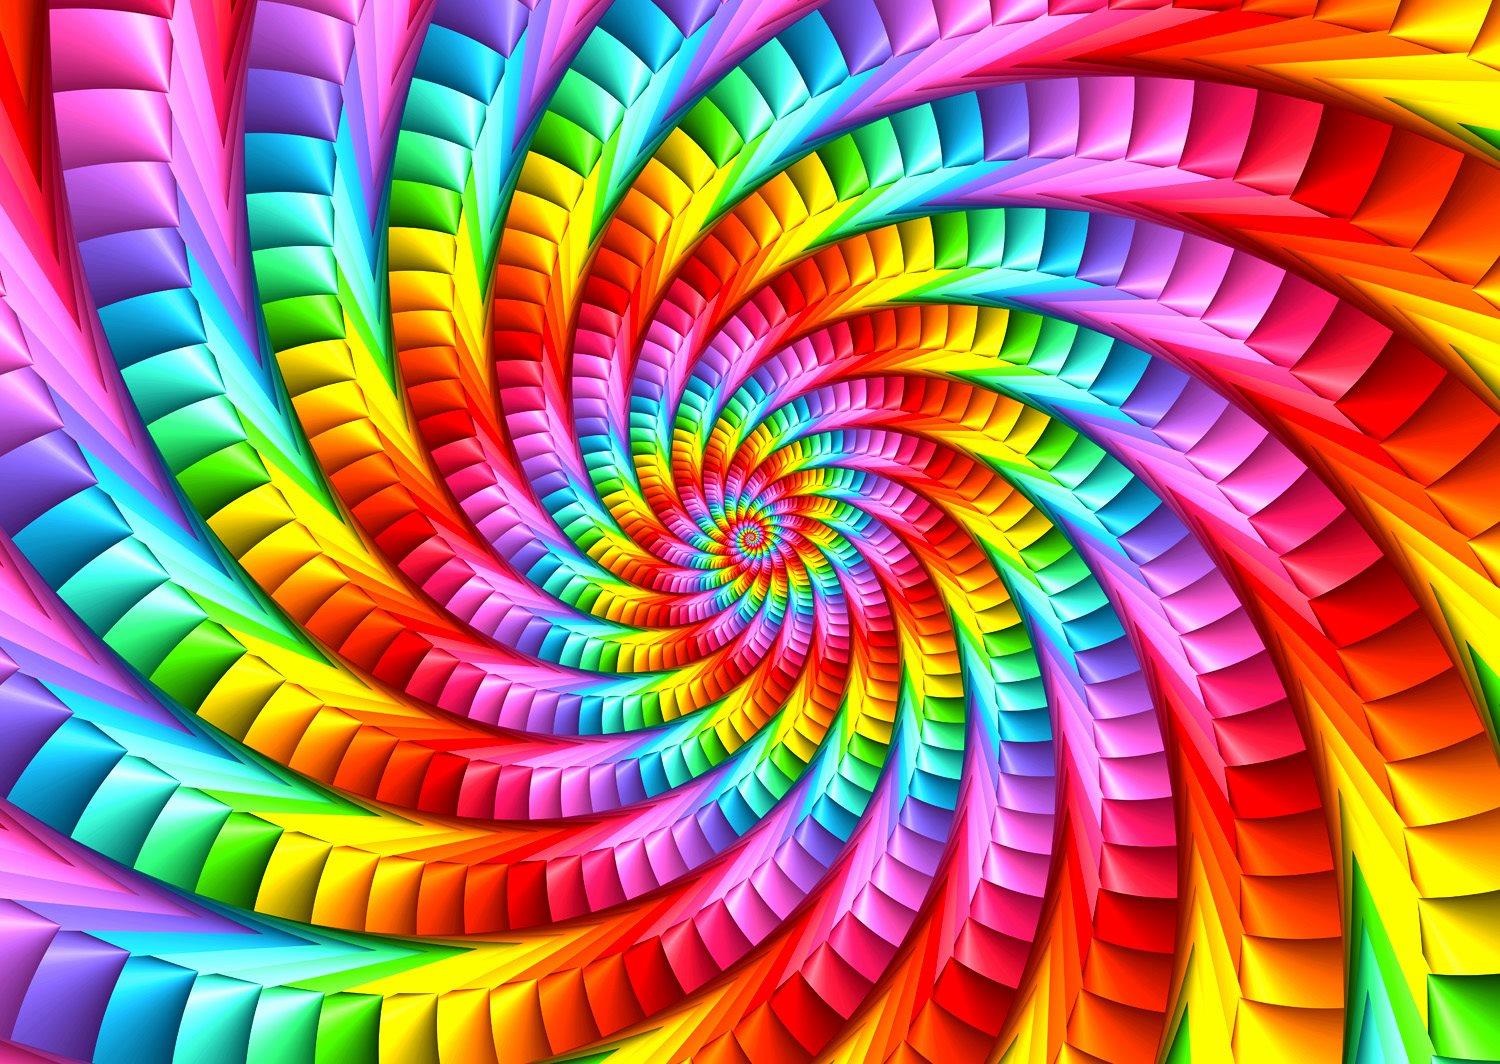 Enjoy Psychedelic Rainbow Spiral Jigsaw Puzzle (1000 Pieces)